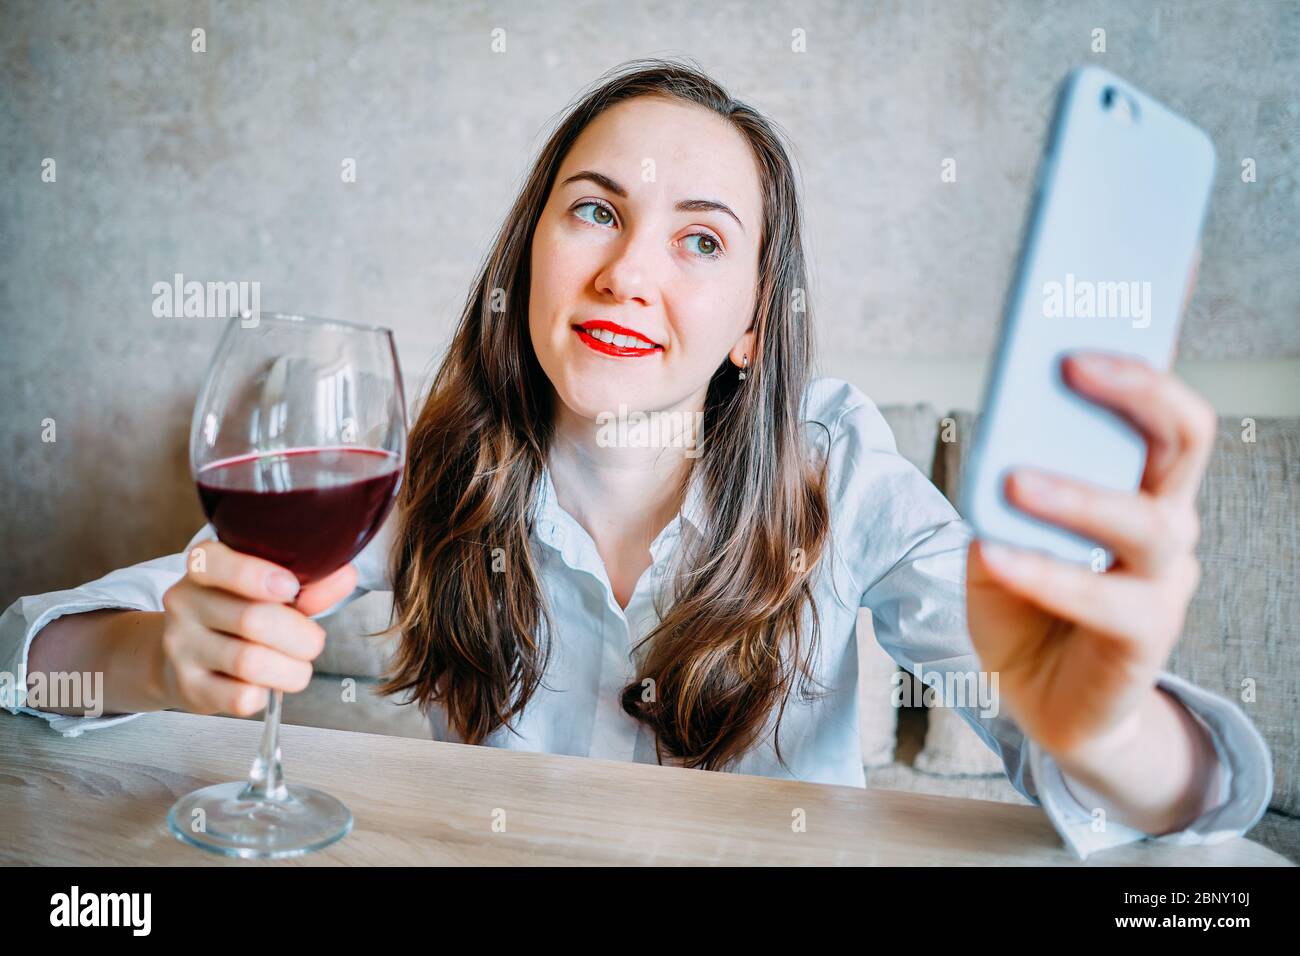 Girl drinks wine on the couch and takes selfie pictures on a smartphone. Close up. Stock Photo